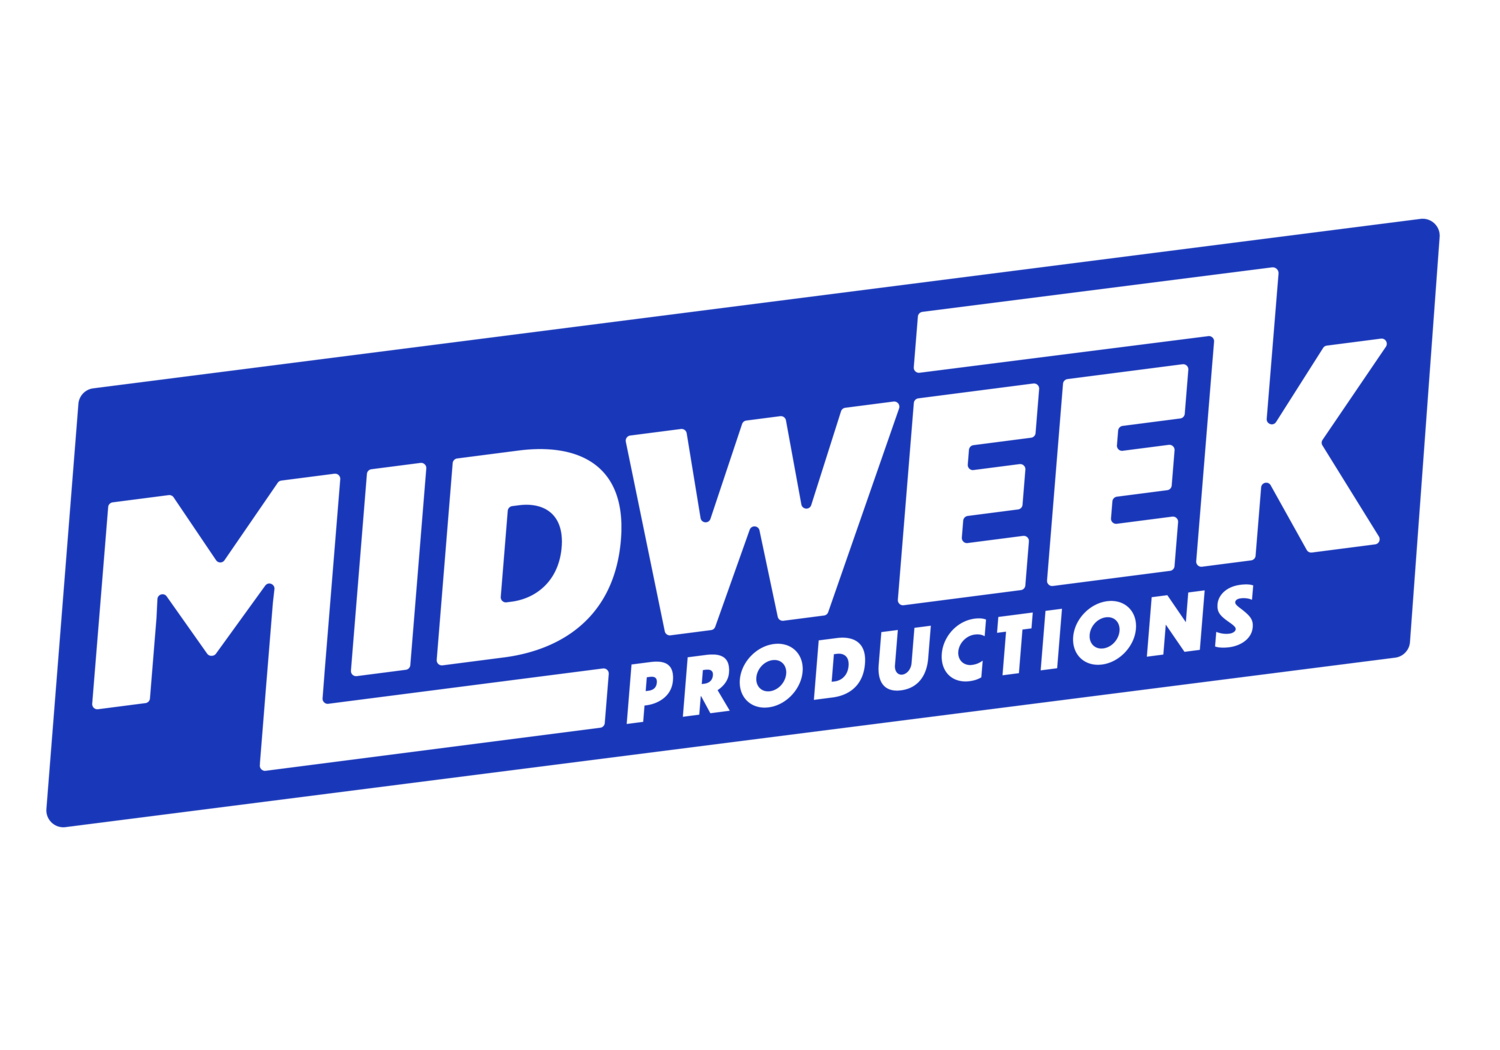 Midweek Productions